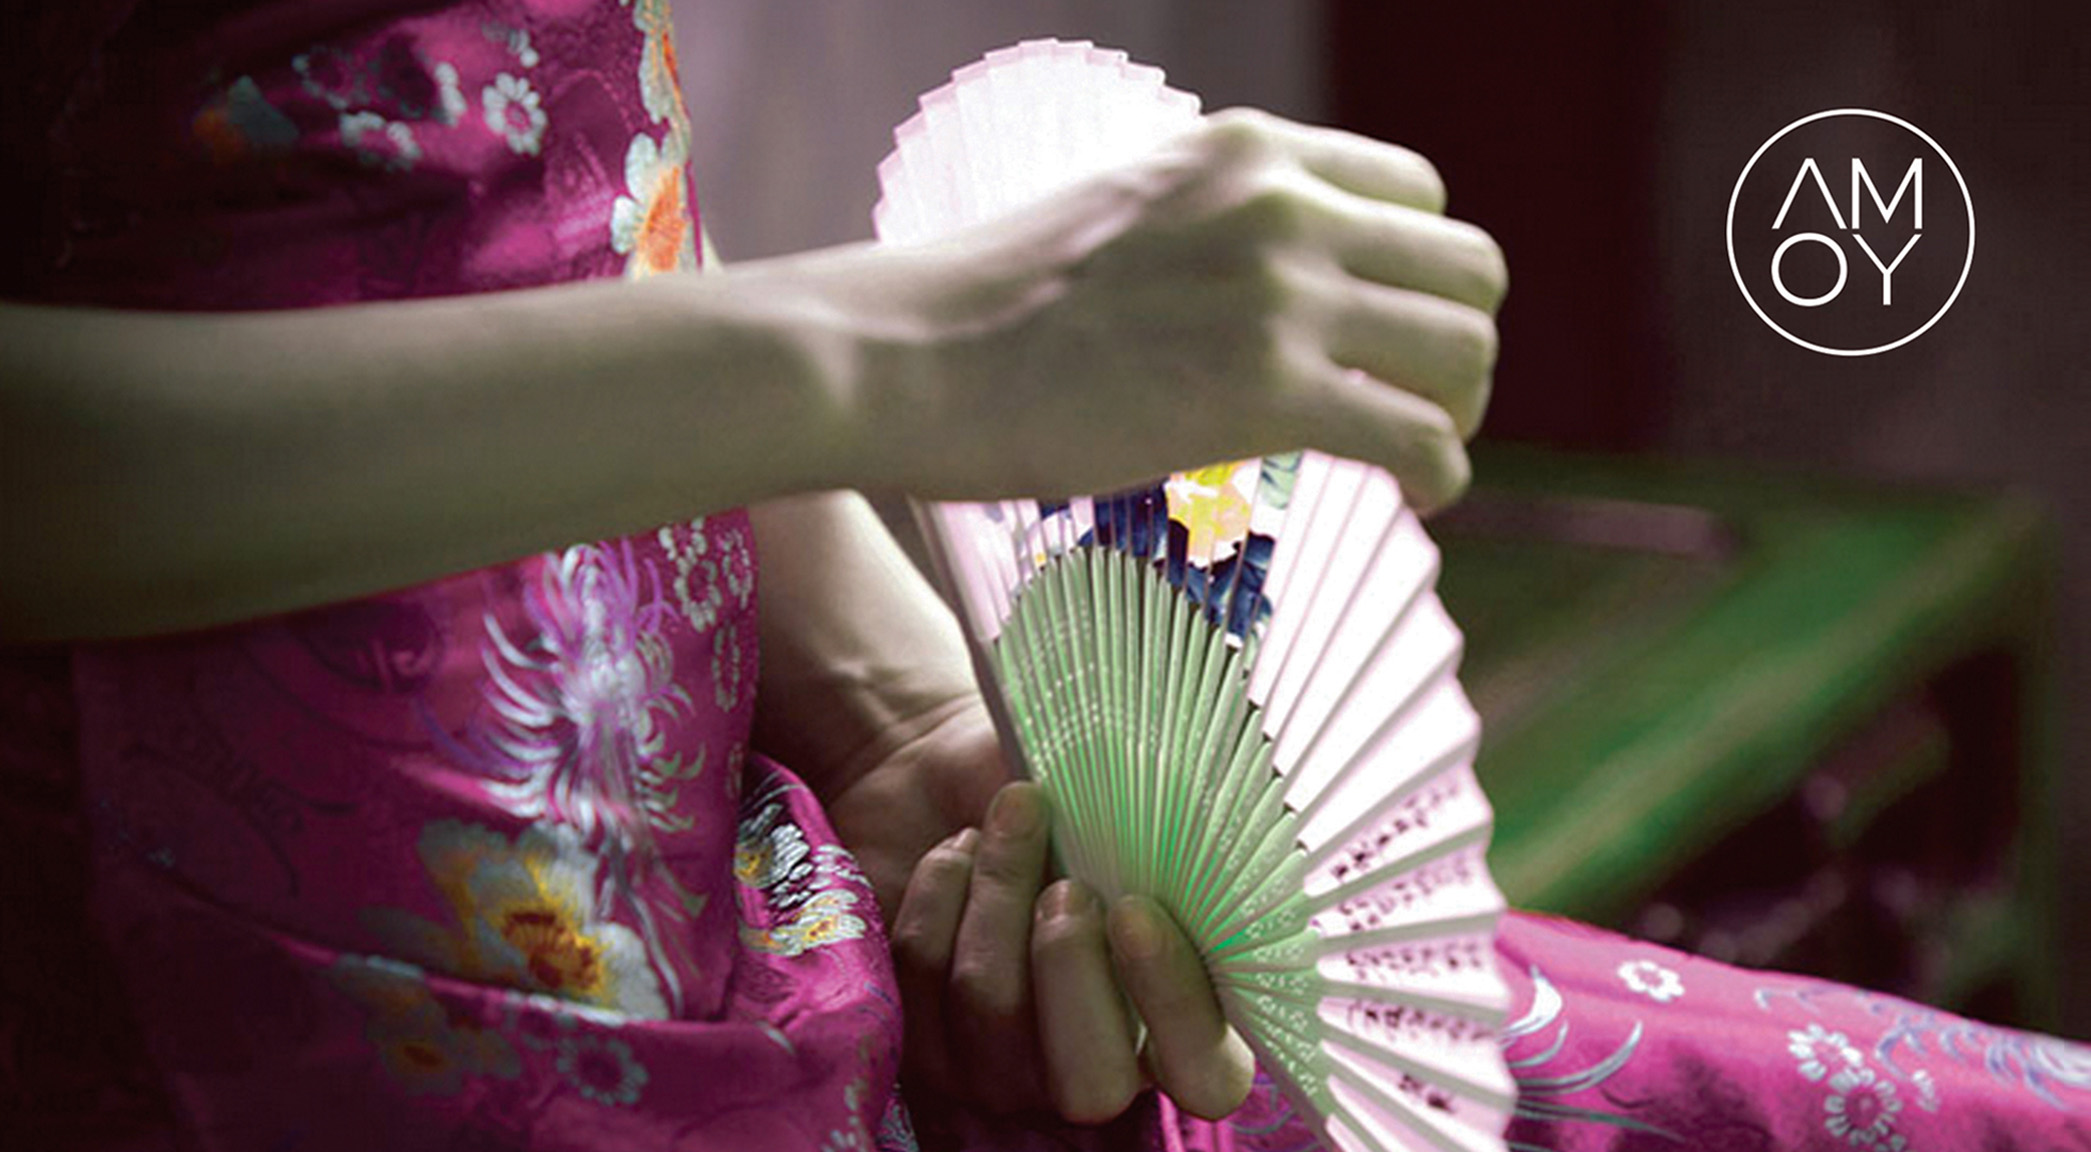 Image showing a woman's hands with a fan of Asian design, and a logo, as a sample of work done in visual identity, design and branding, by the SmartCuts Creative Agency studio in Lausanne and Geneva, Switzerland for the purposes of creative communication.